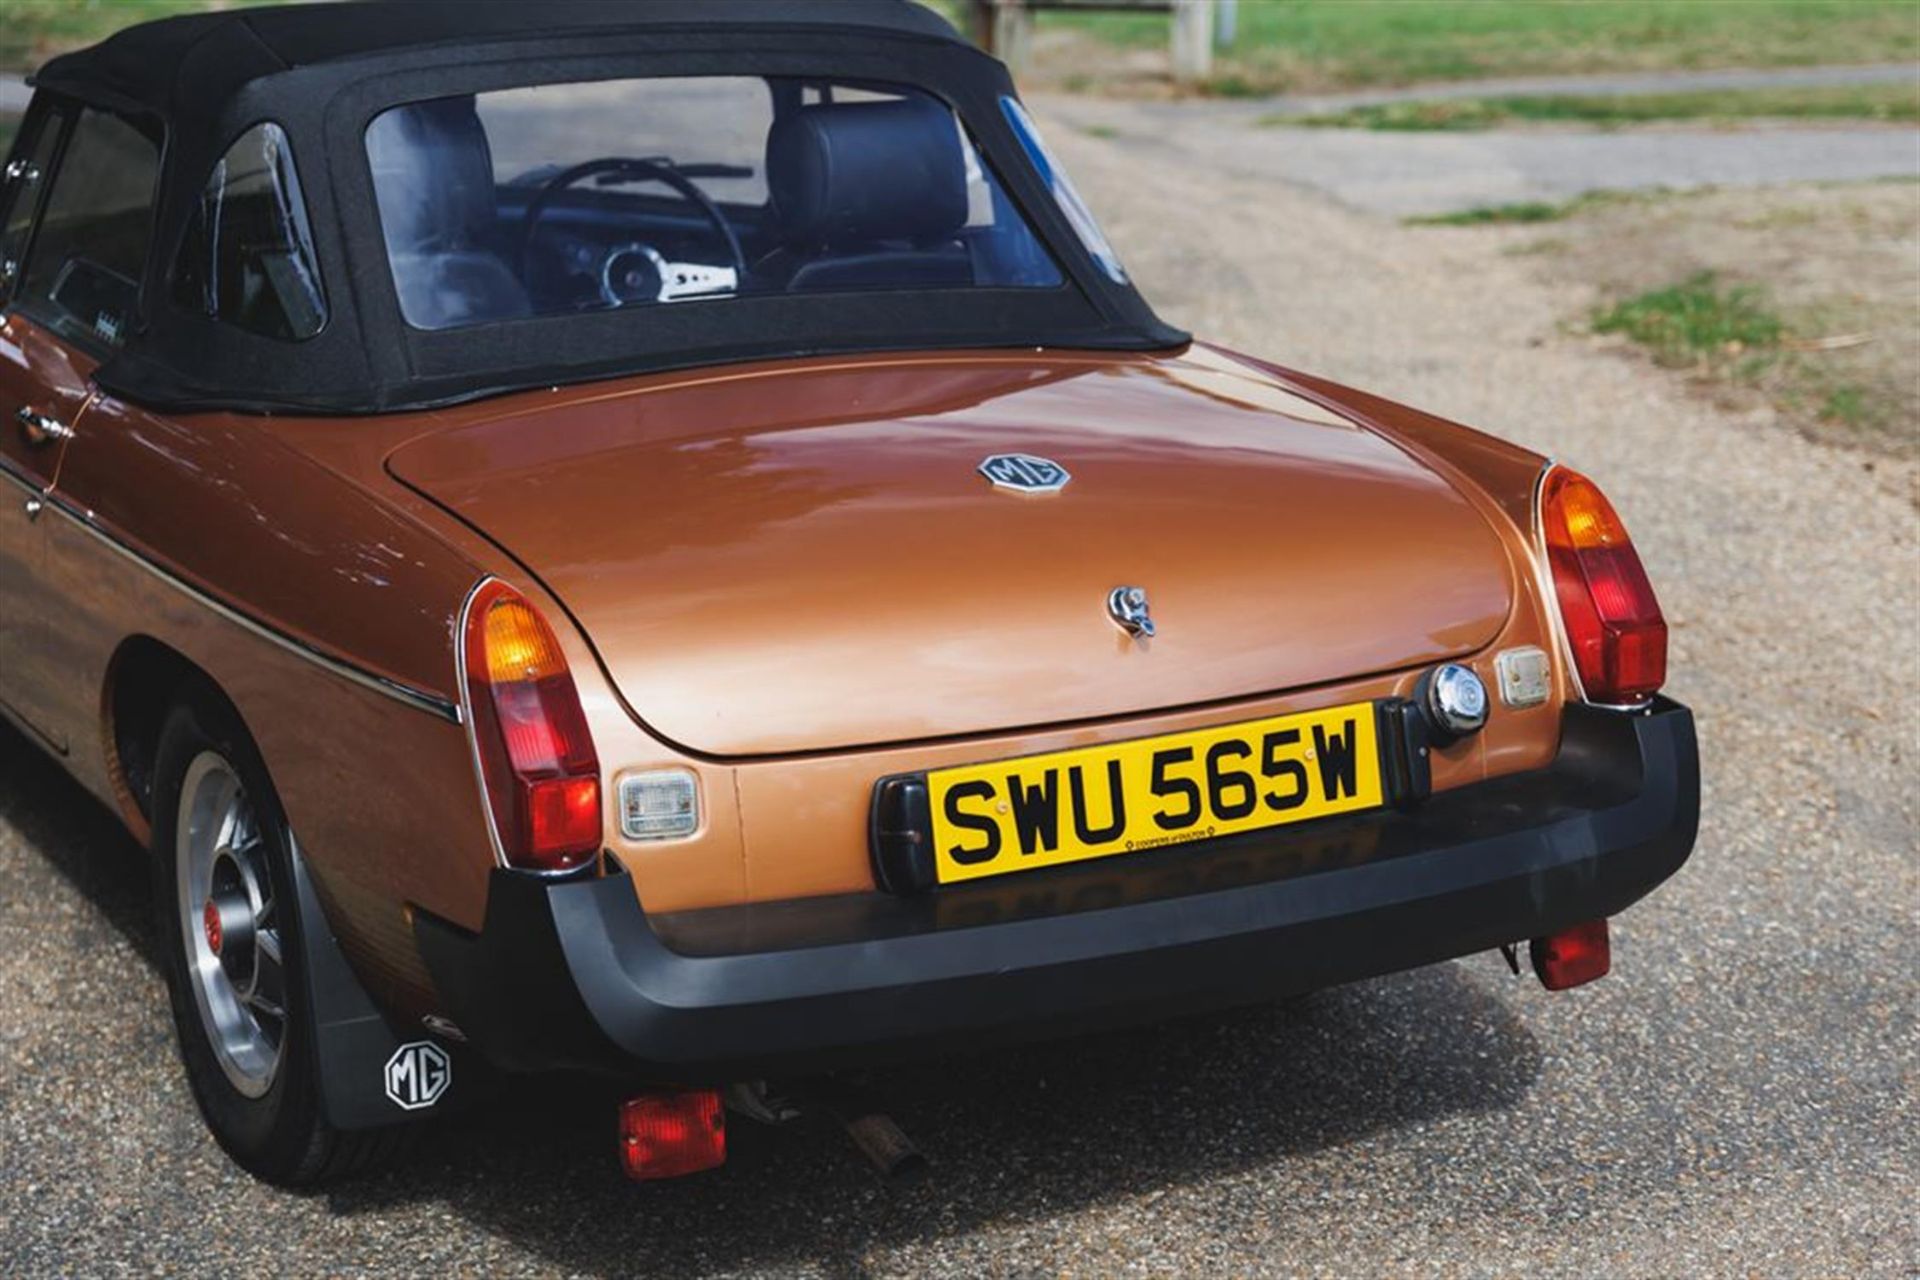 **WITHDRAWN** 1981 MG B LE Roadster - Image 9 of 10